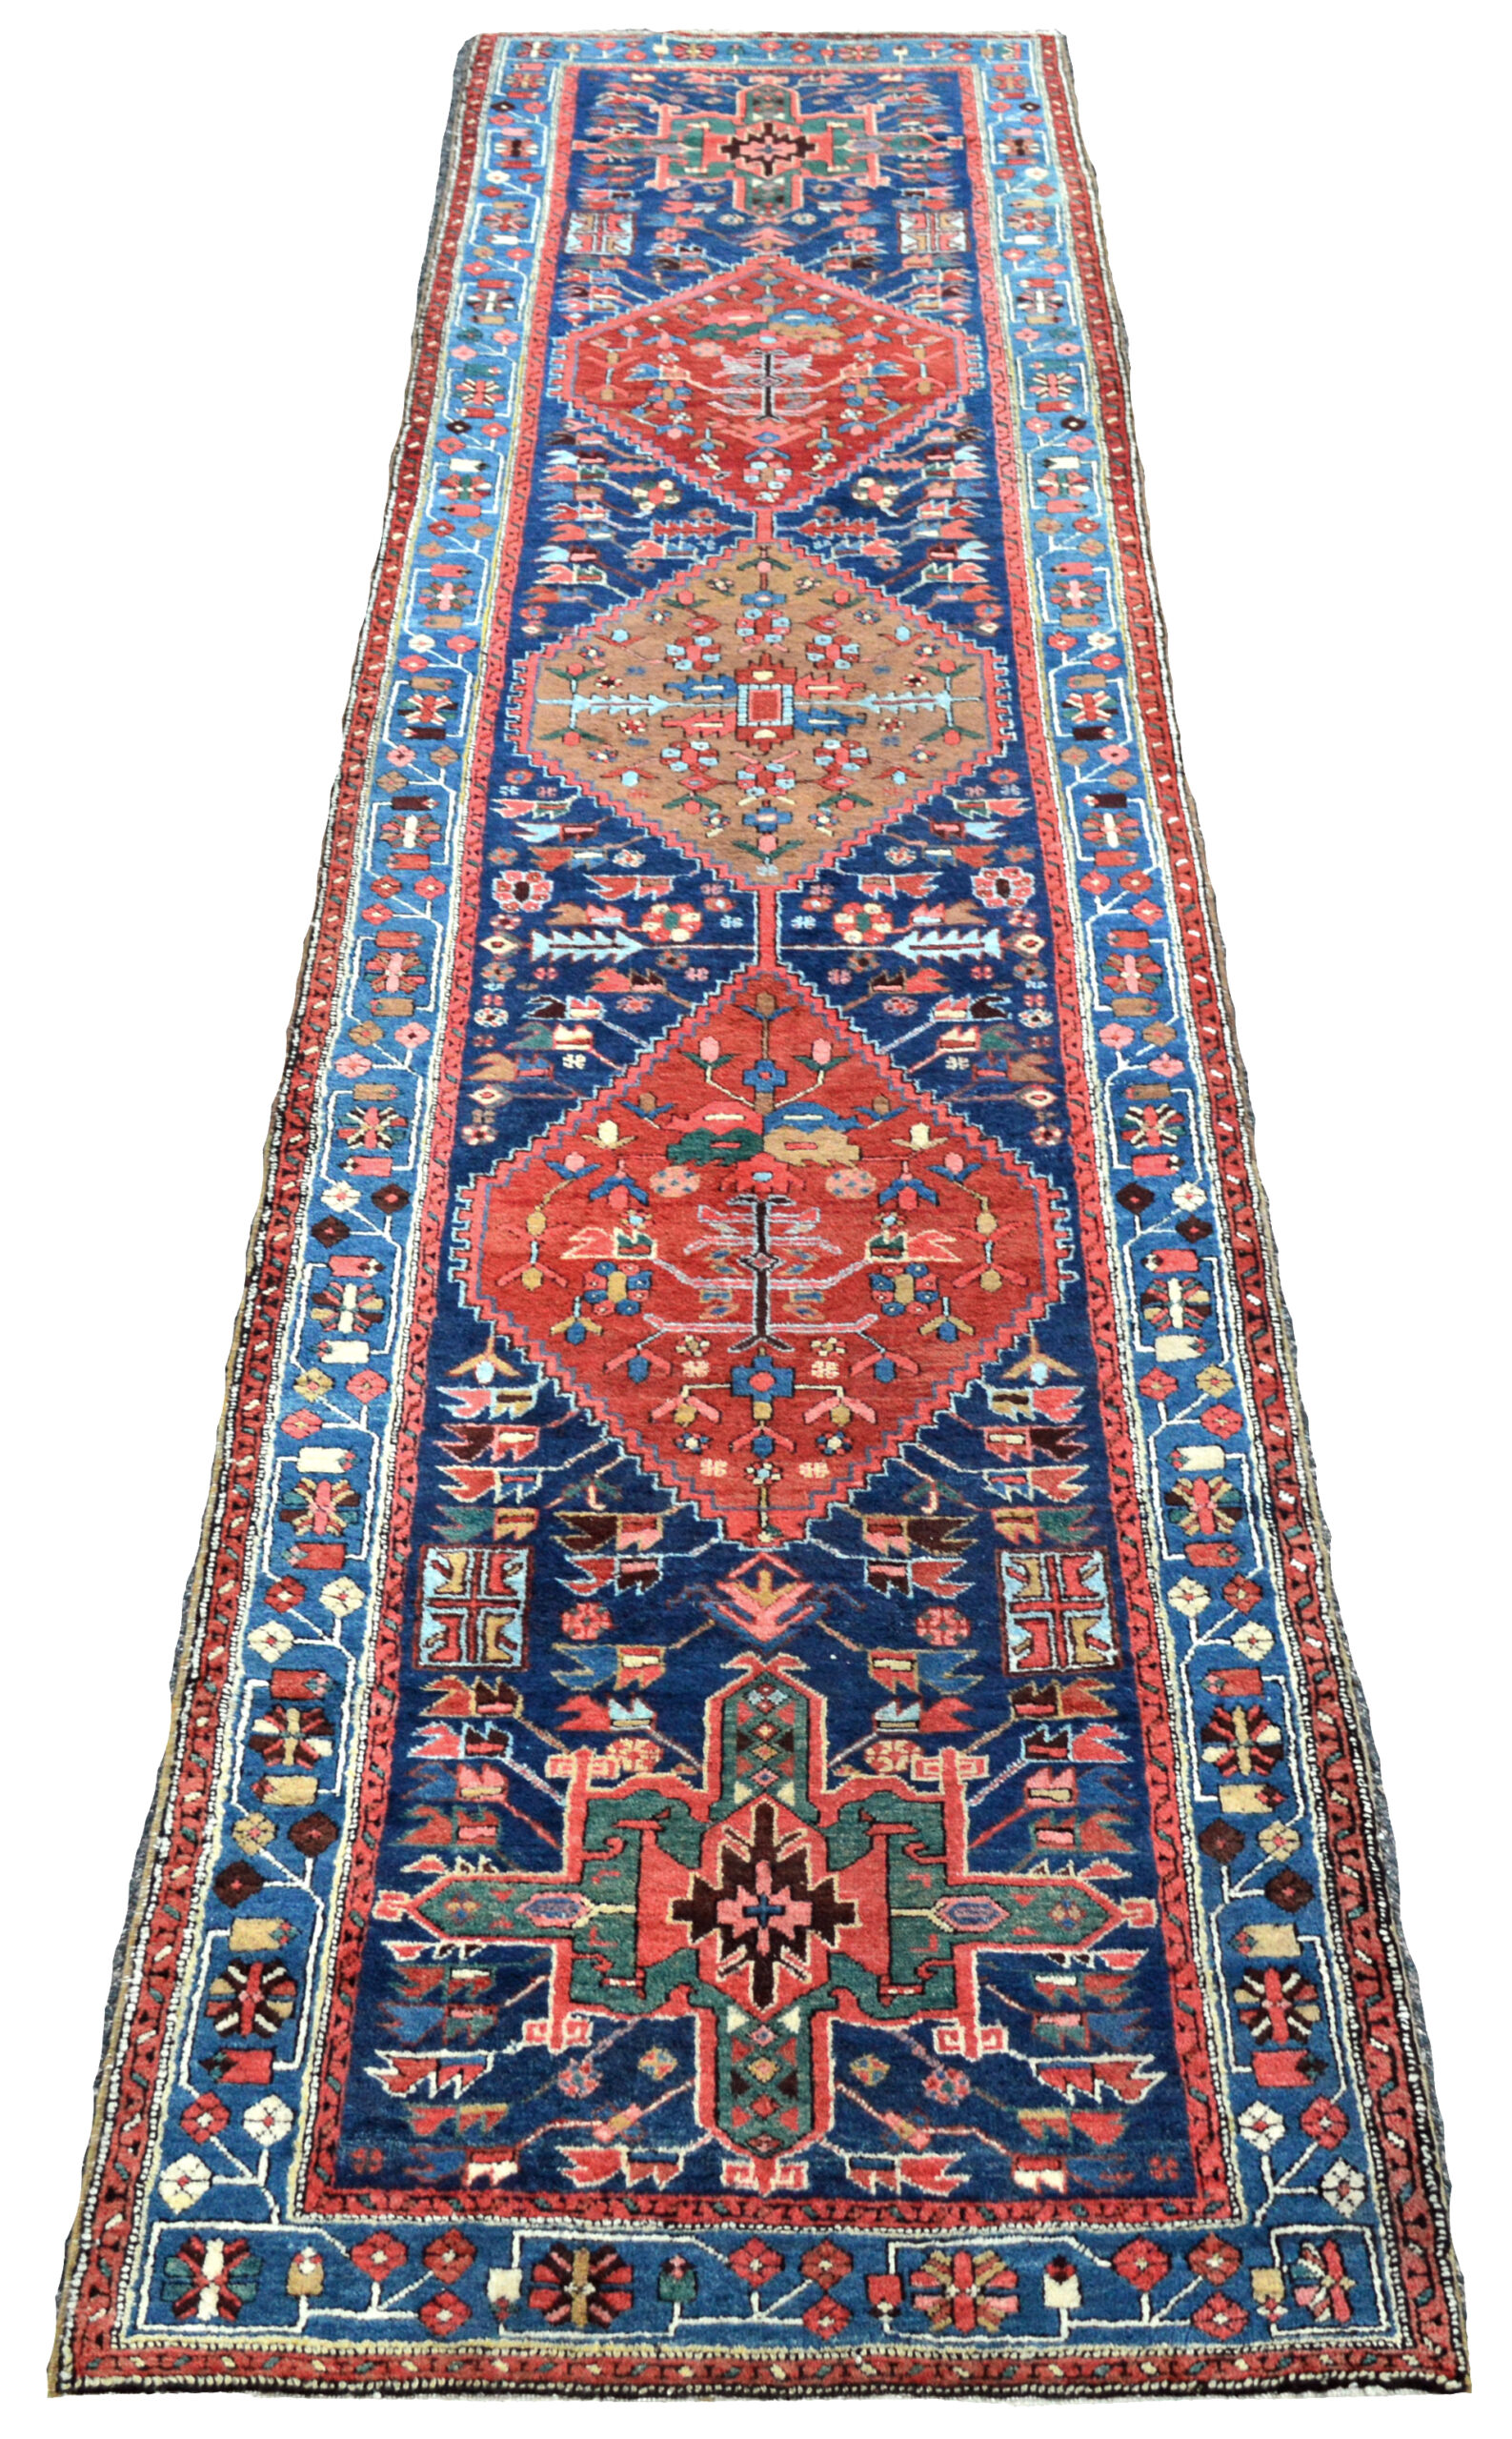 Antique Heriz runner with medallions on a navy blue field, northwest Persia, circa 1910, Douglas Stock Gallery, antique Oriental runner rugs, antique Persian runner rugs, antique rugs Boston,MA area South Natick